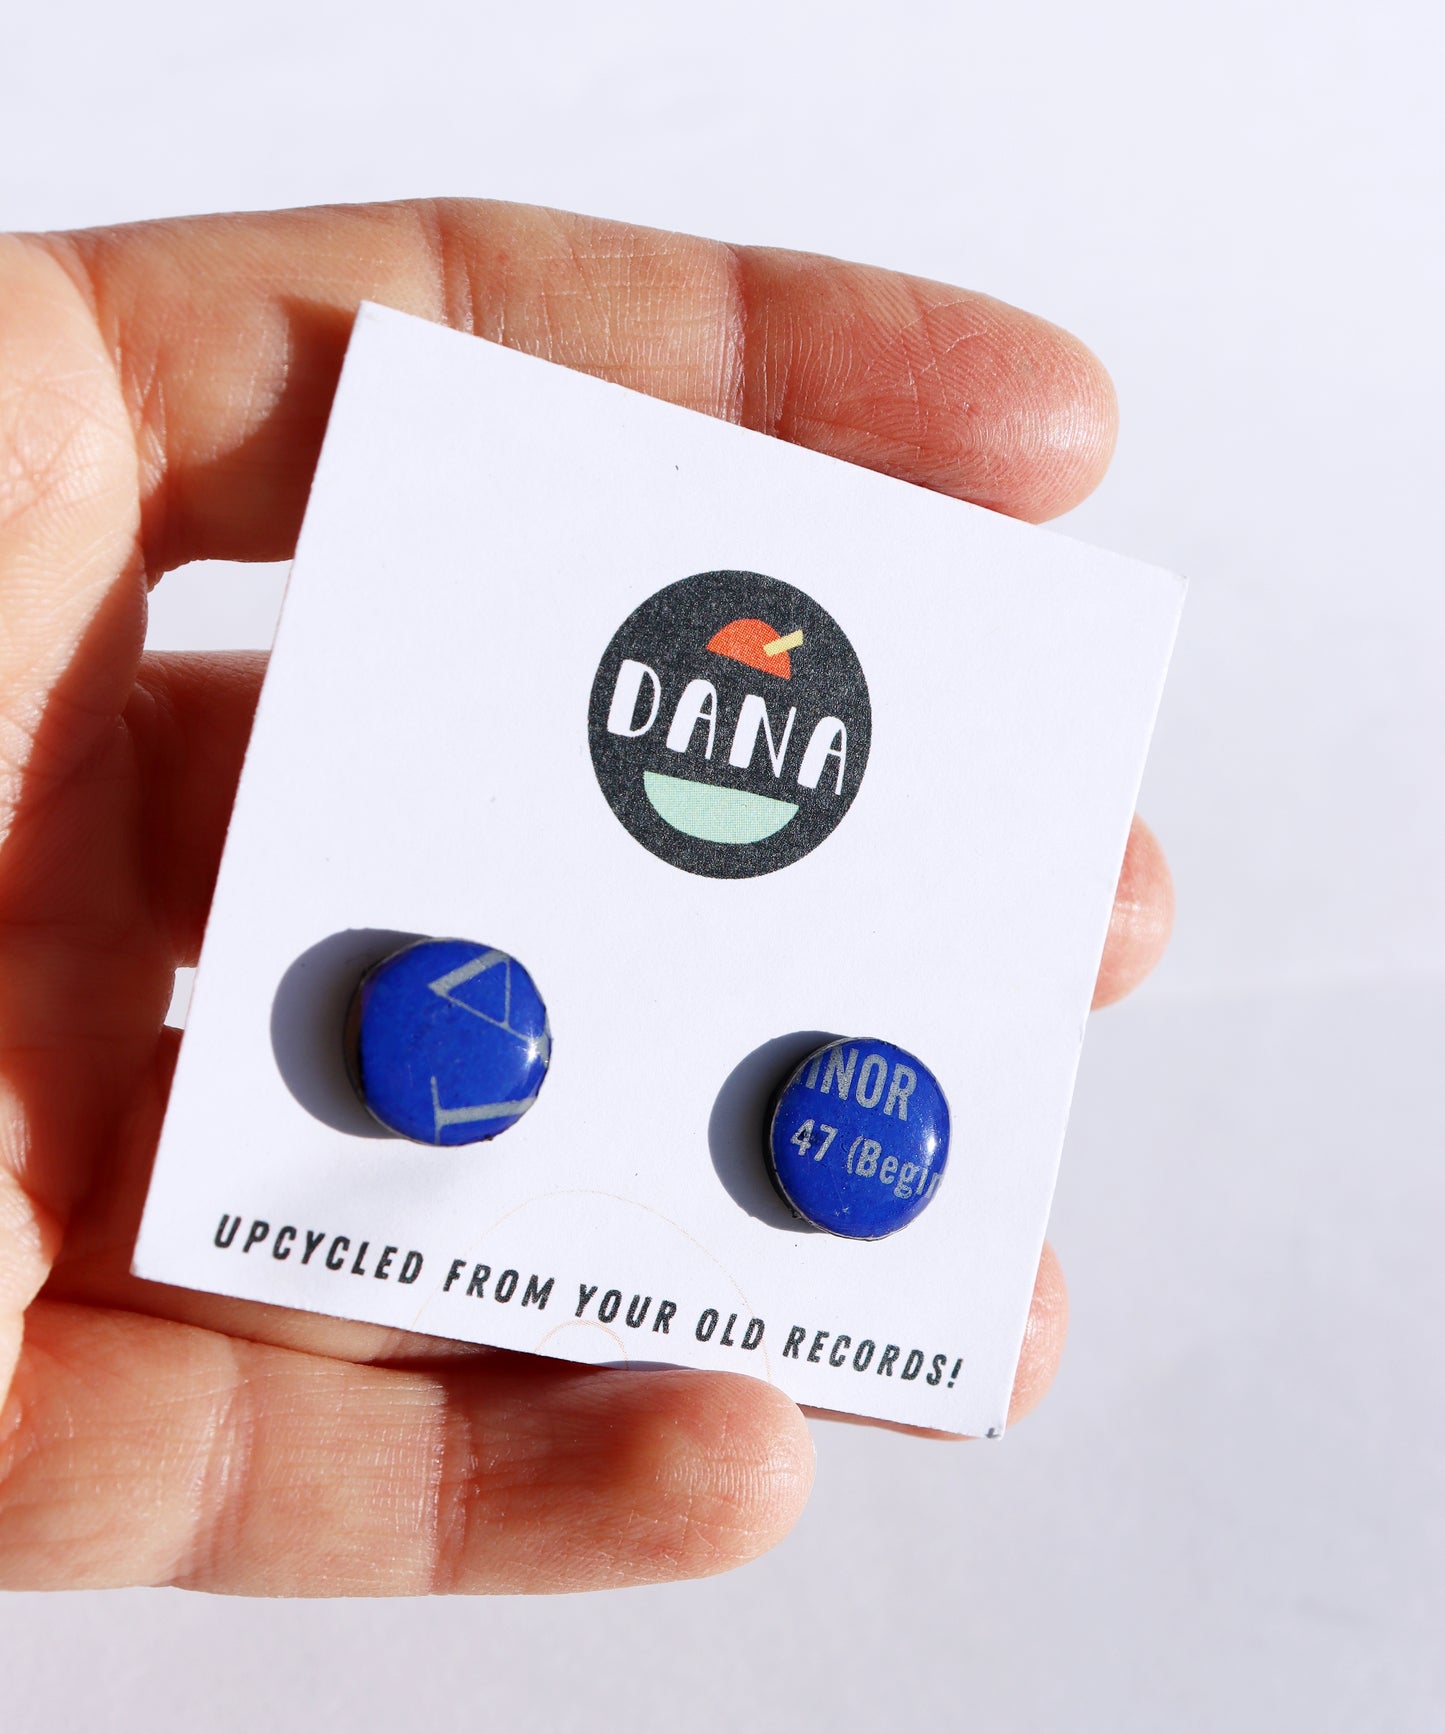 30% OFF / royal blue upcycled vinyl studs made from a Columbia label